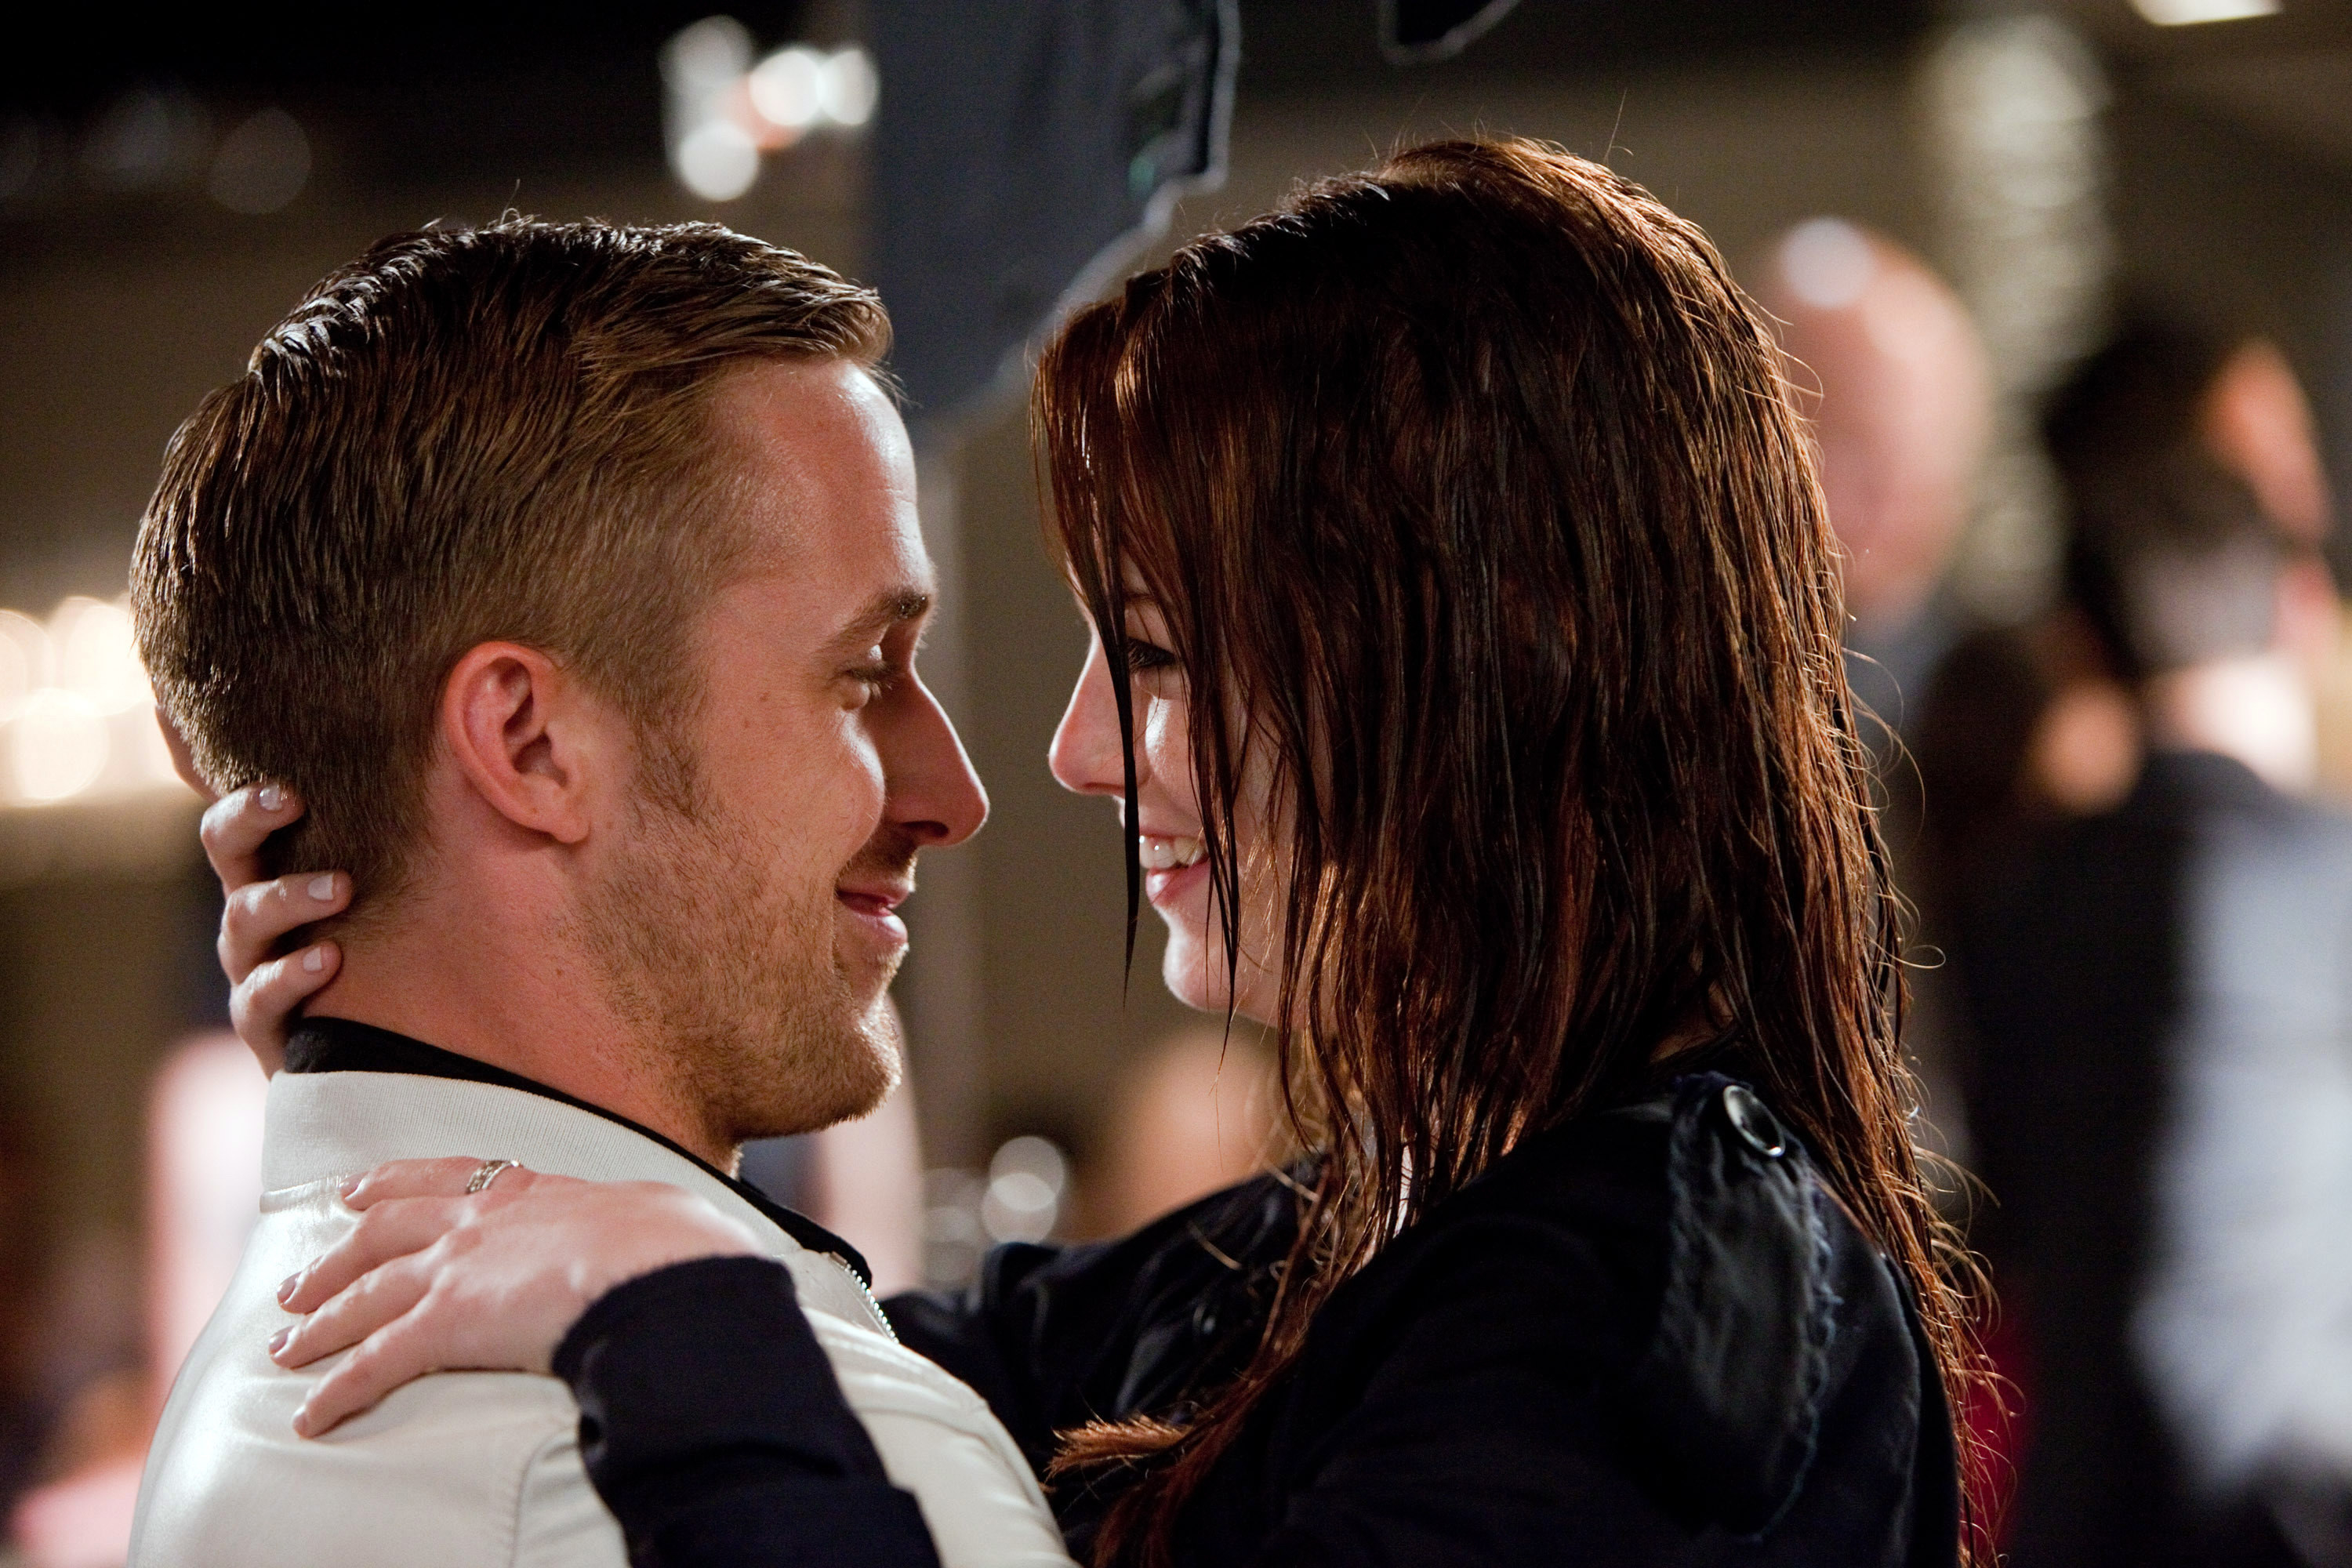 Crazy, Stupid, Love (2011 - PG-13) - The Bend Theater